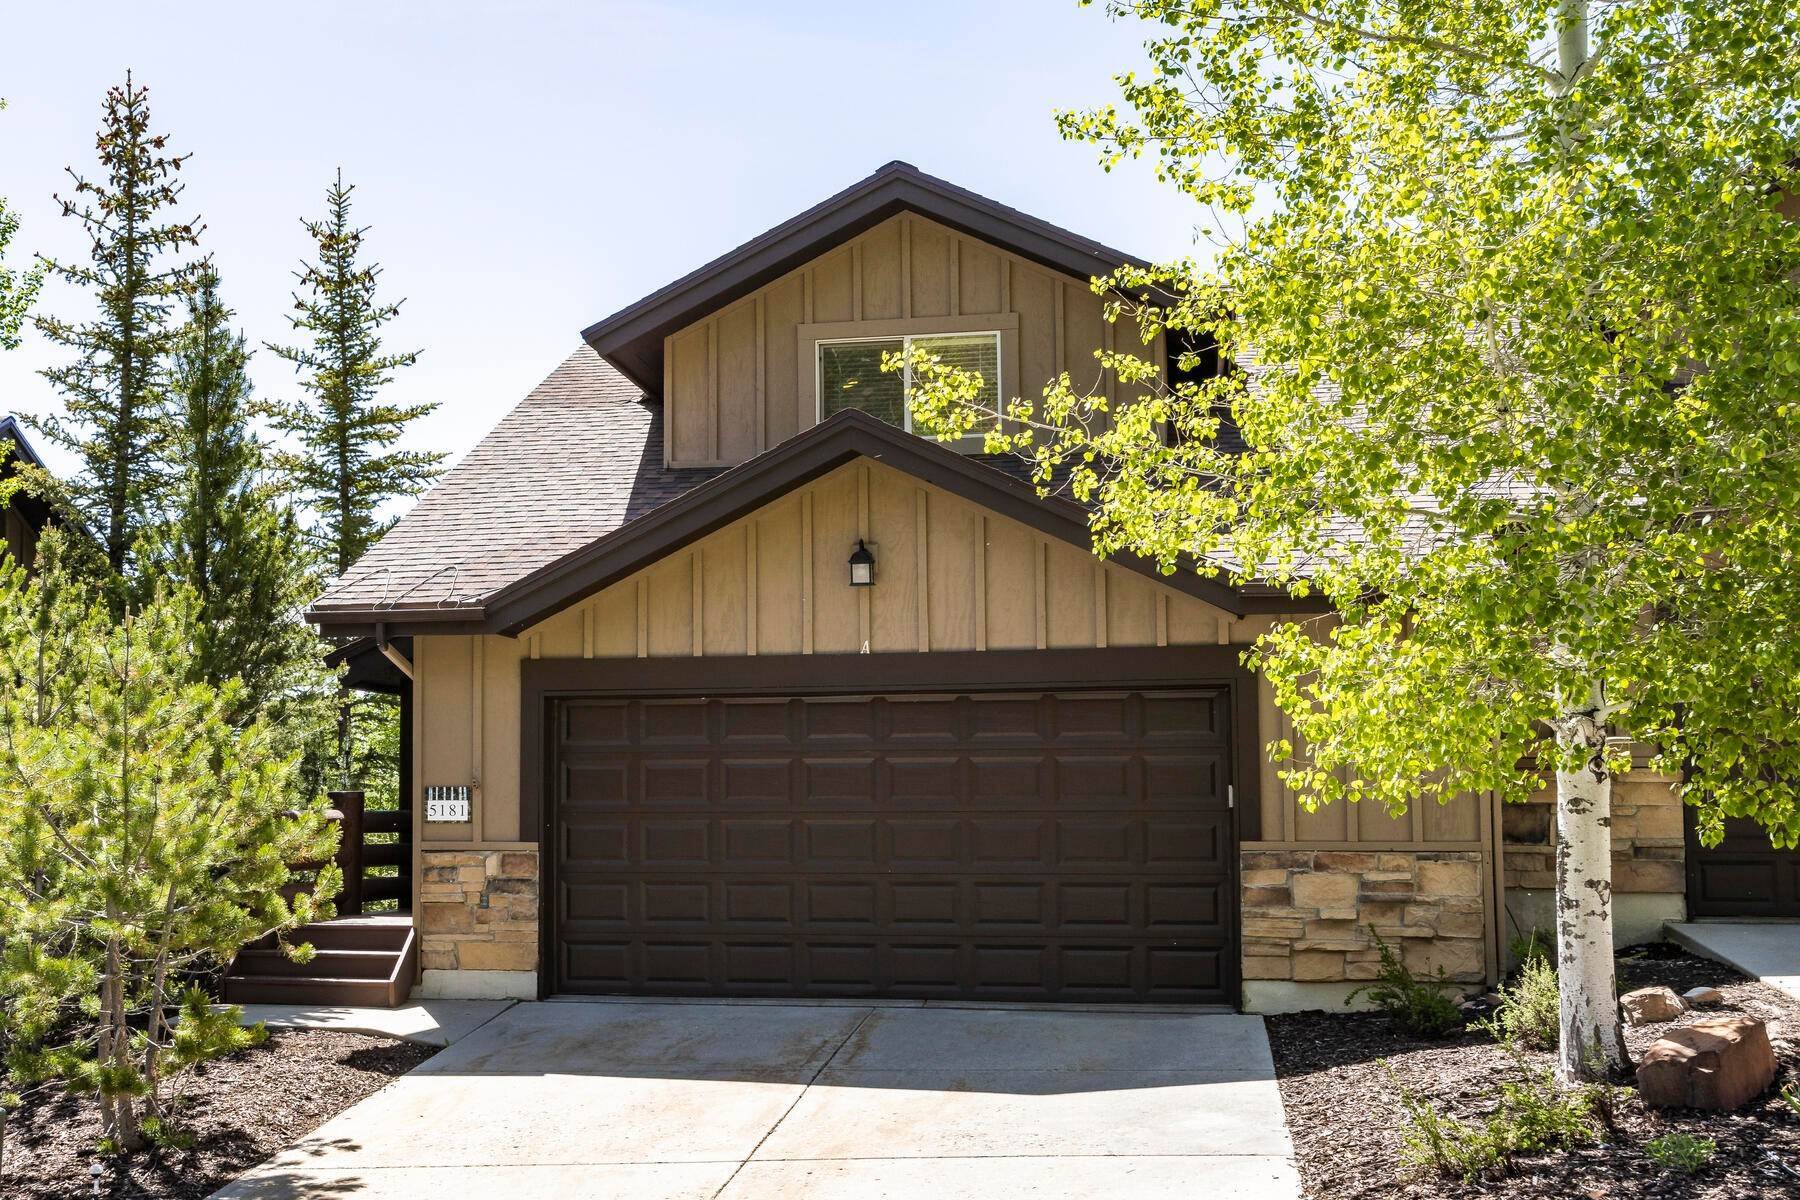 Townhouse for Sale at Light & Bright 4 Bedroom - Convenient Location With Access to Sun Peak Amenities 5181 Cove Canyon Dr #A Park City, Utah 84098 United States